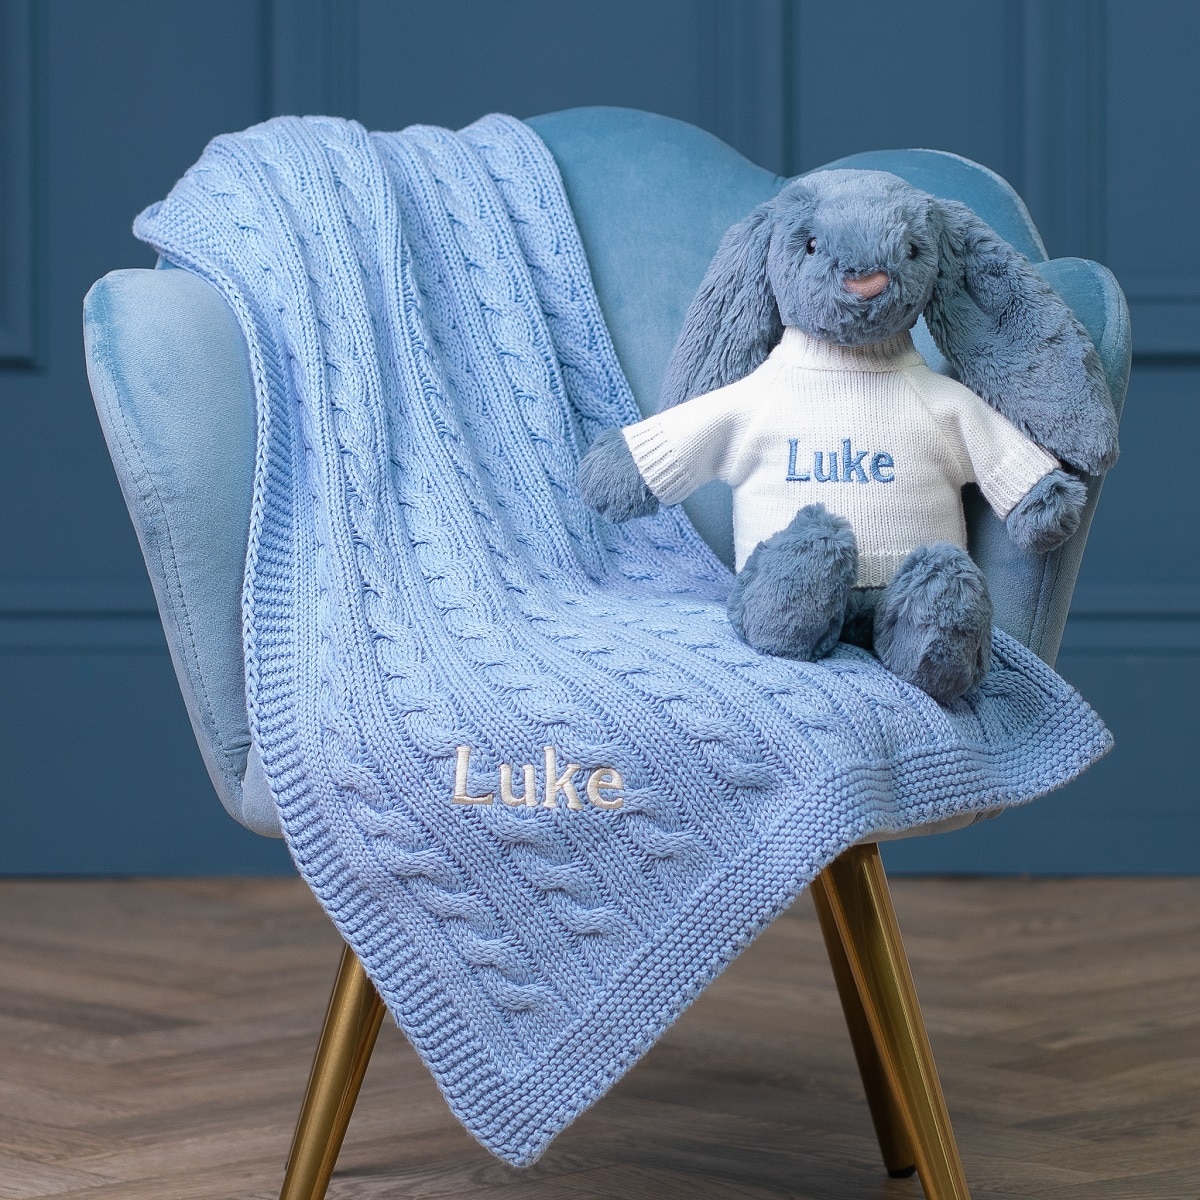 Personalised Toffee Moon luxury blue grey cable baby blanket and dusky blue Jellycat bashful bunny